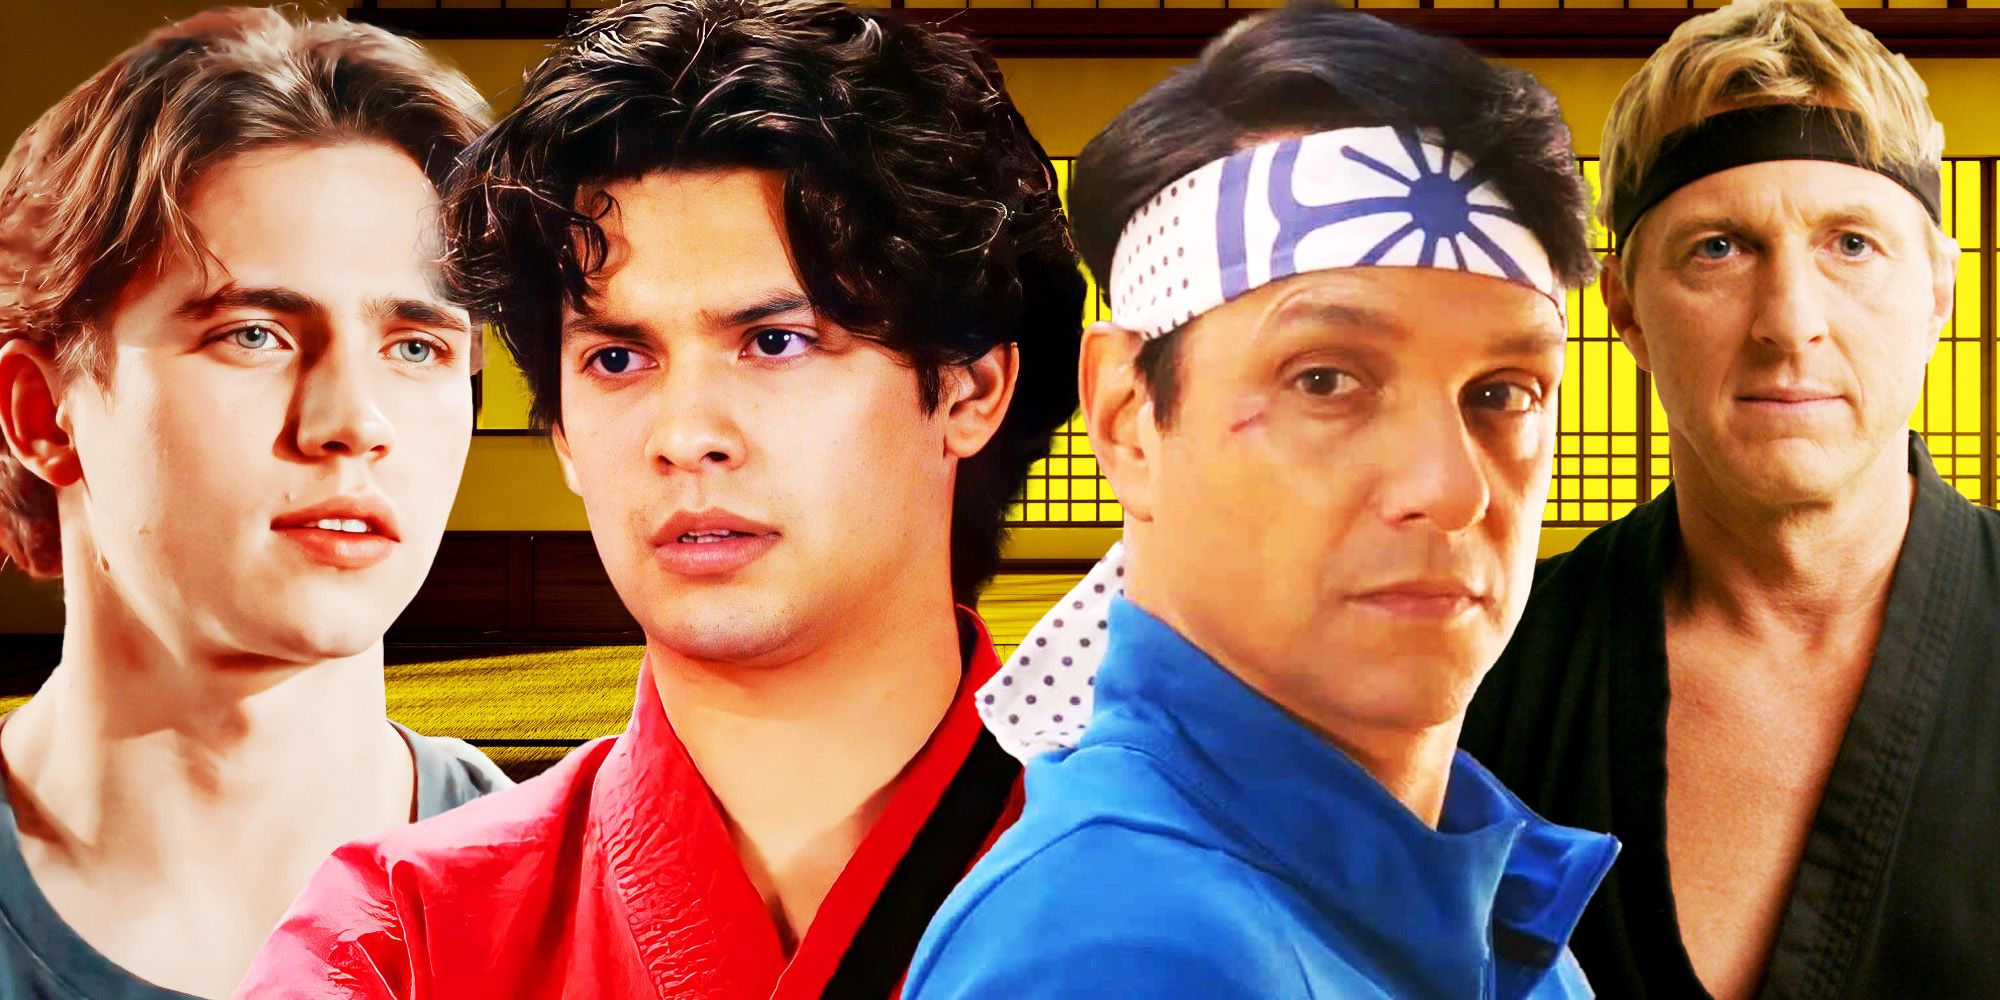 6 Concerns We Already Have About The New Karate Kid Movie After 5 Great Cobra  Kai Seasons